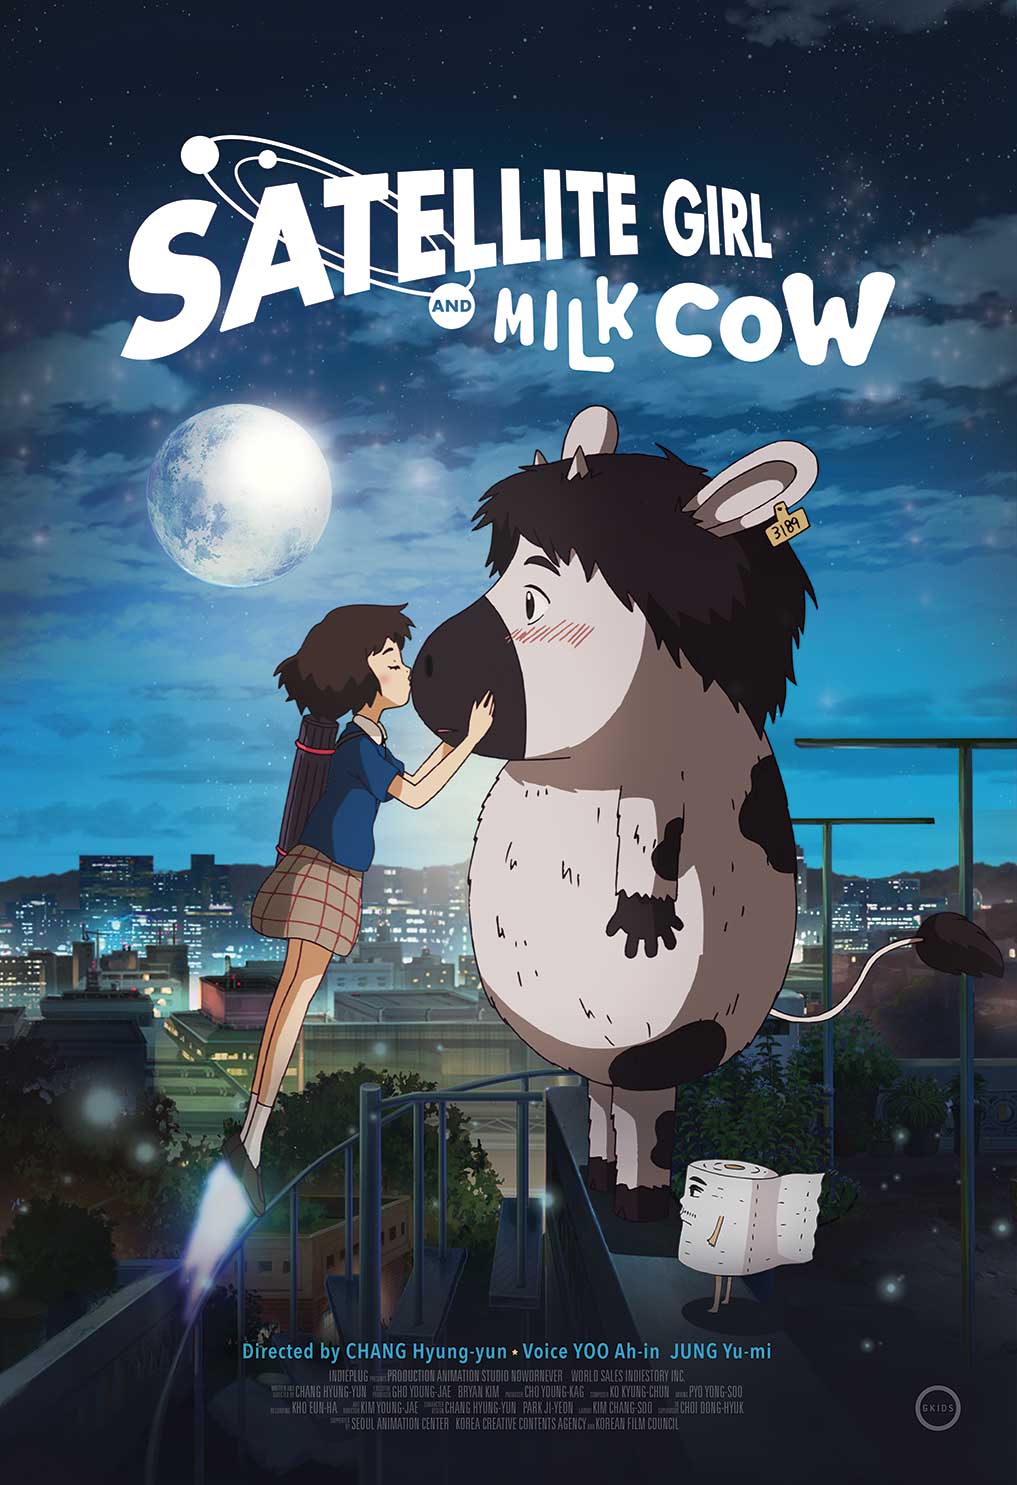 Satellite Girl and Milk Cow - GKIDS Films